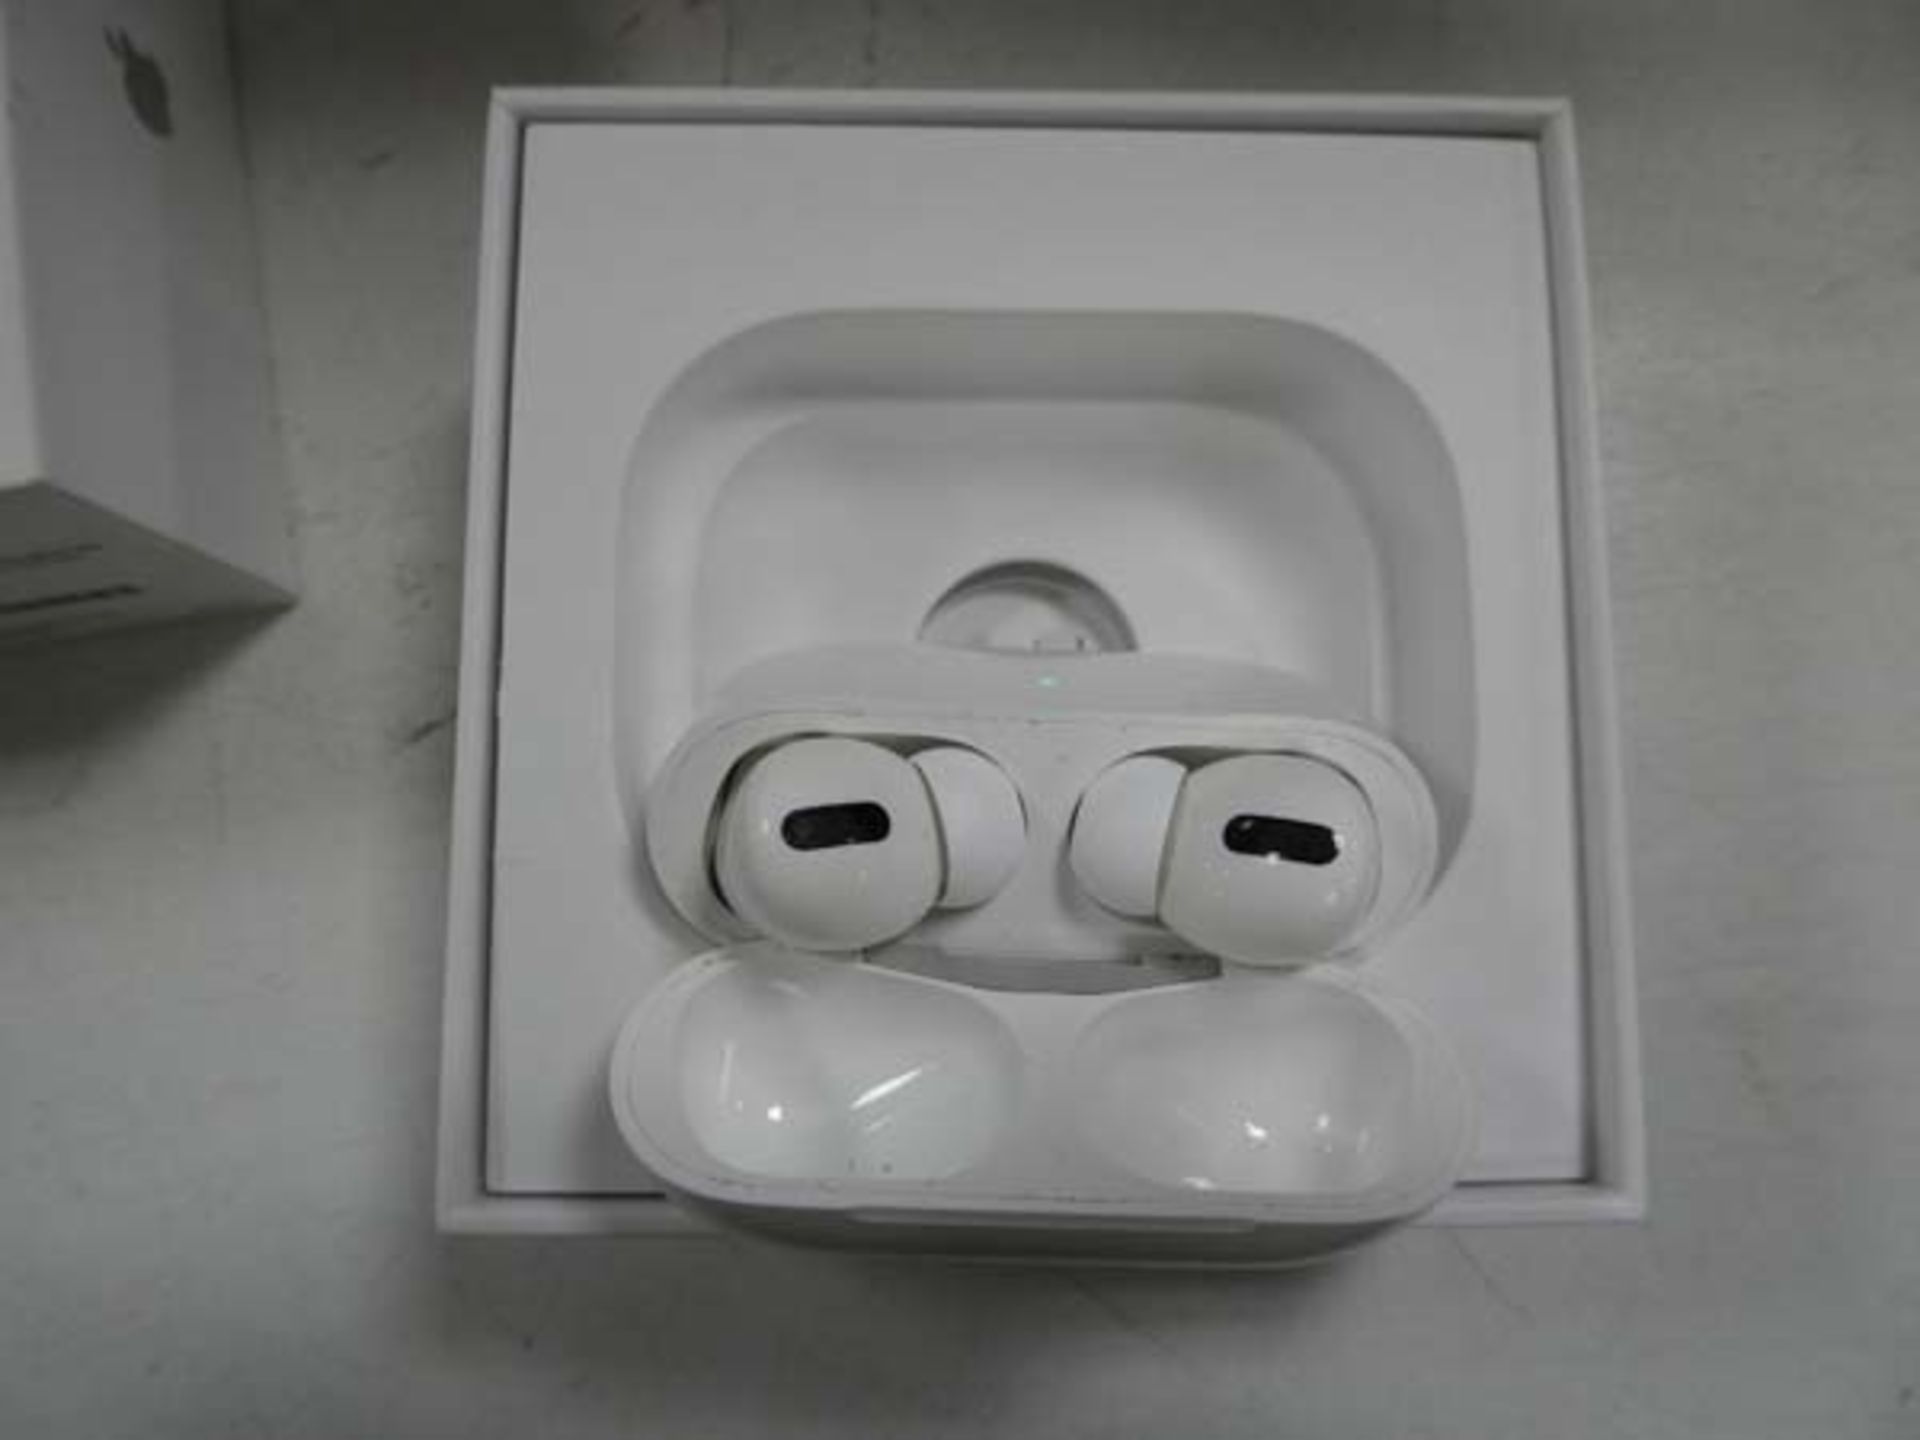 Apple AirPods Pro with wireless charging case and box